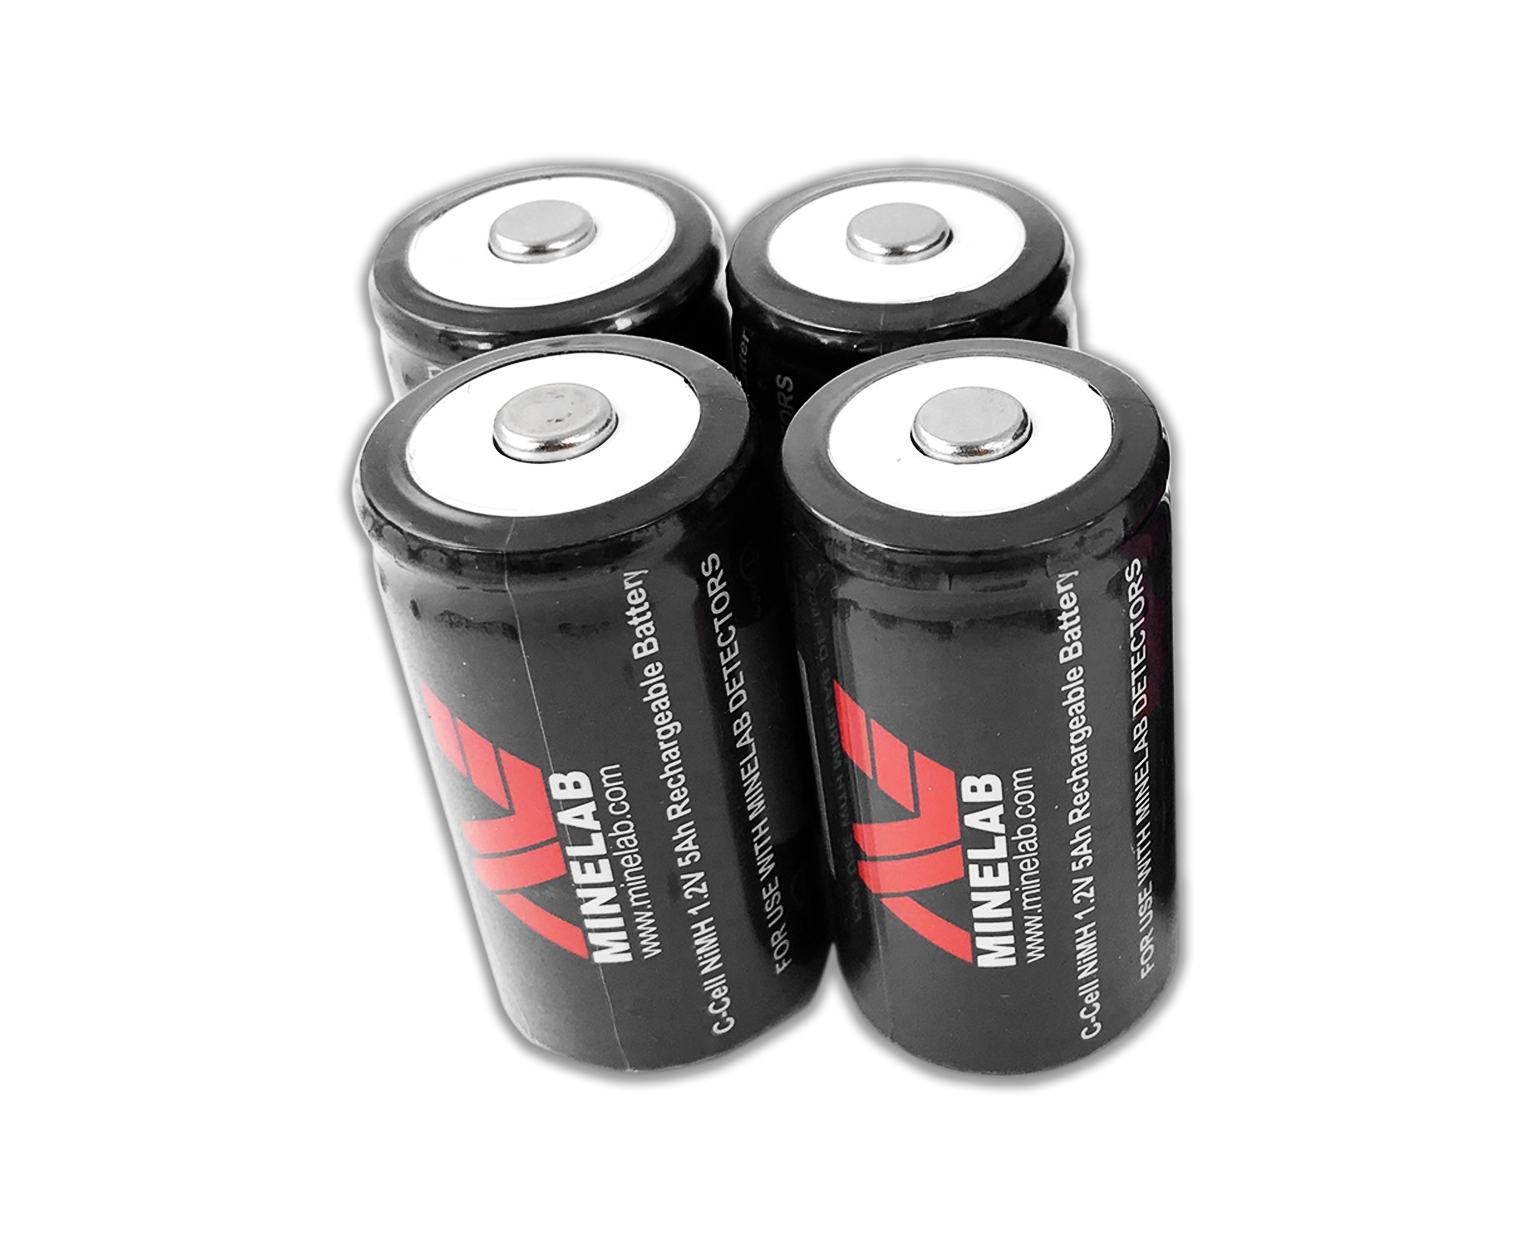 Battery C cell Rechargeable NiMH 5A